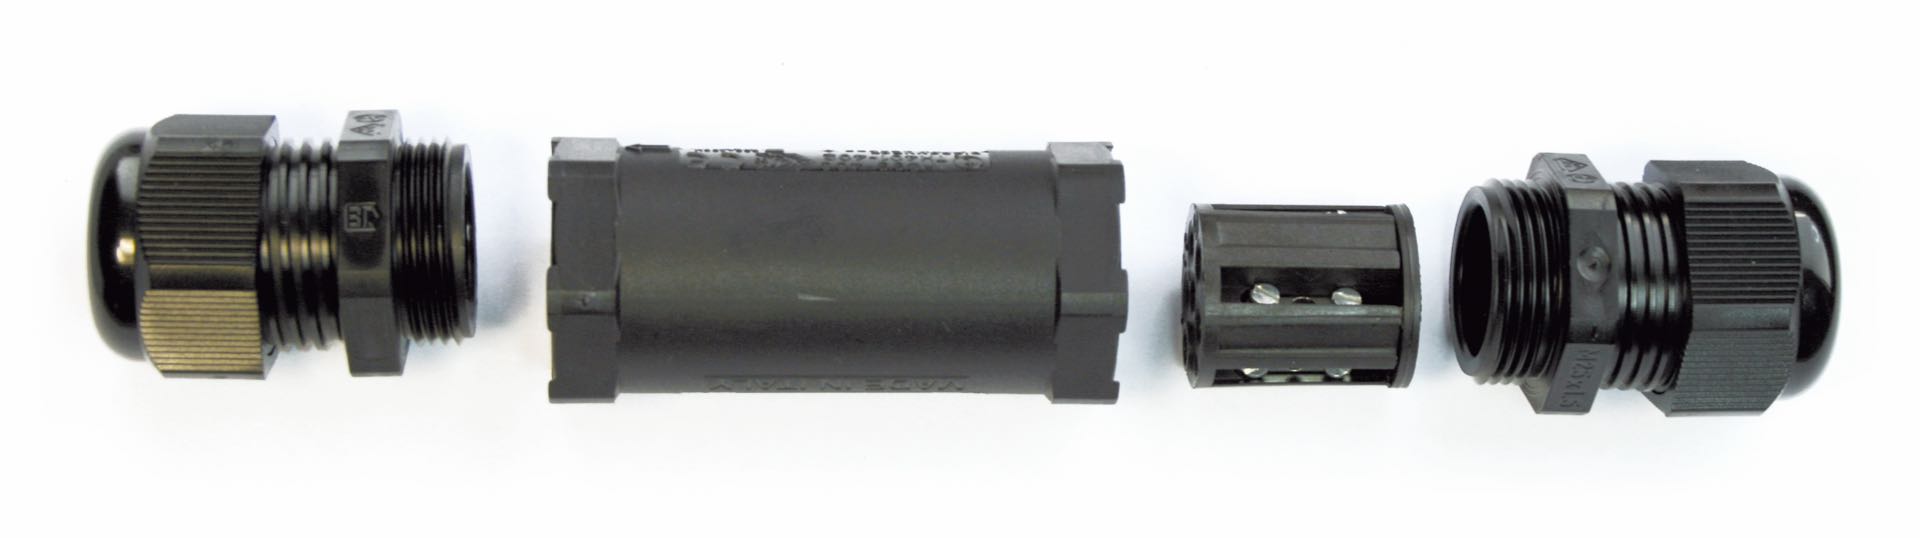 Cable coupling sets IP 68